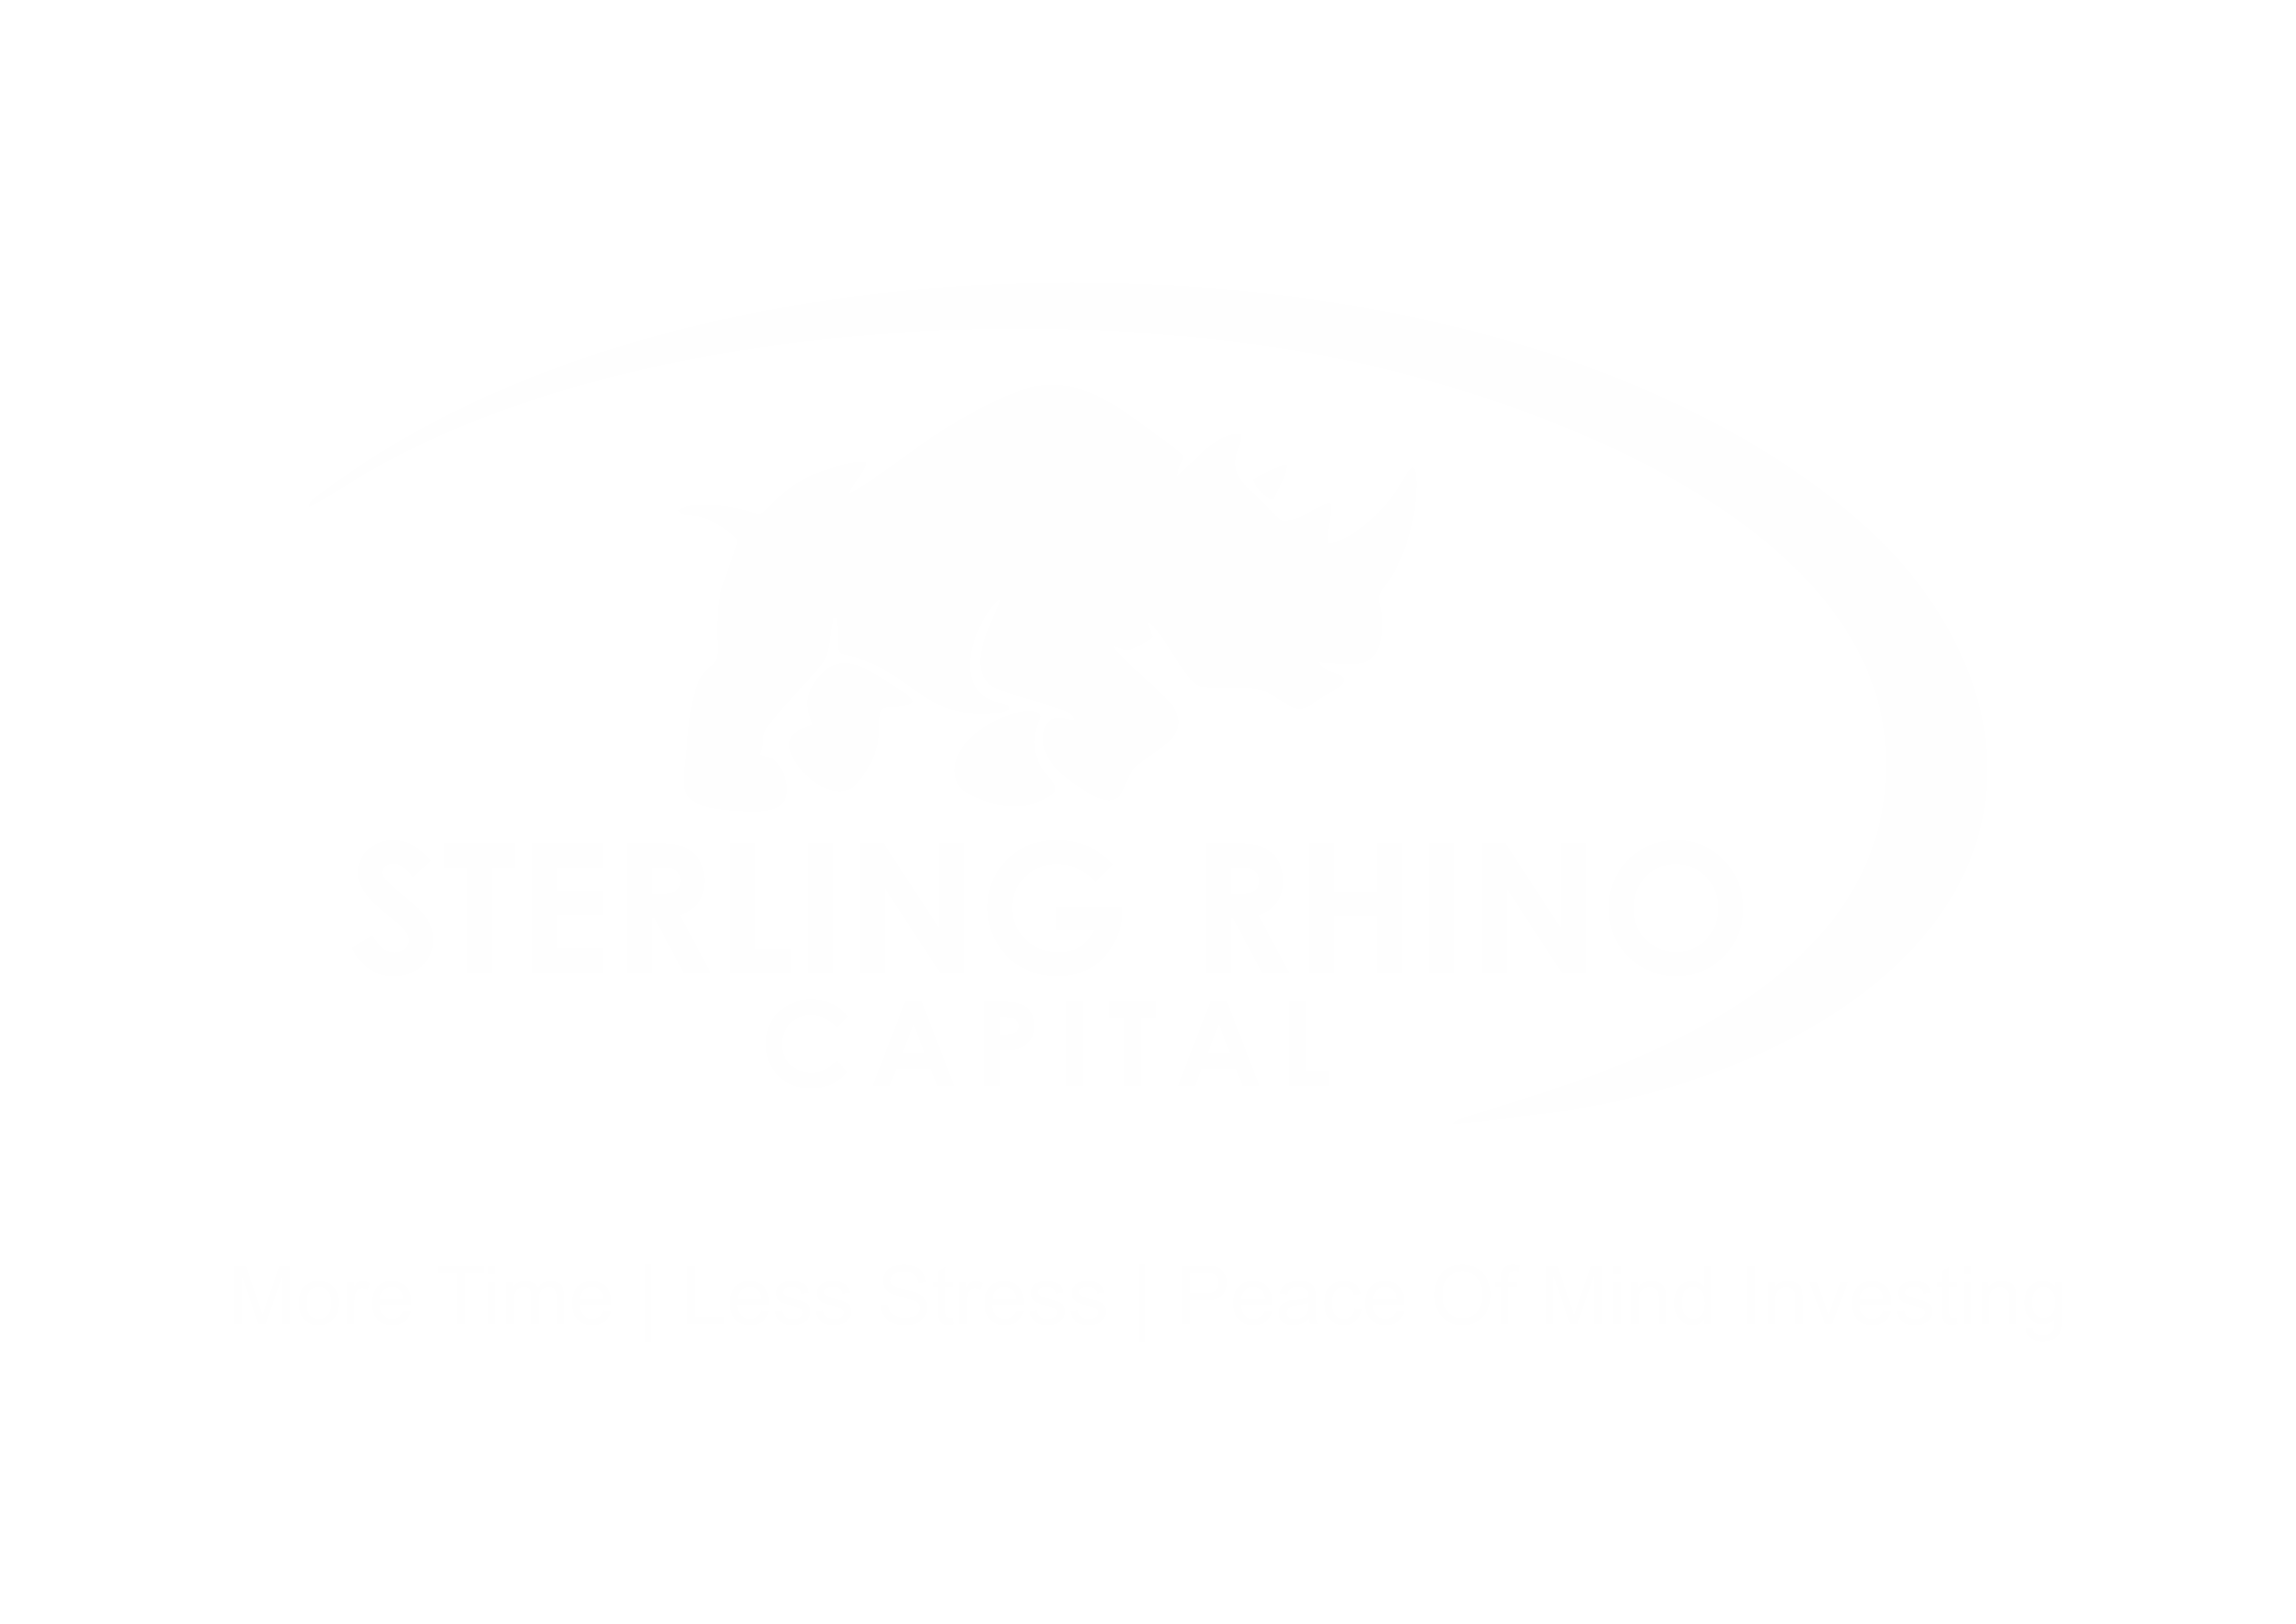 Sterling Rhino Capital 1d White with white background